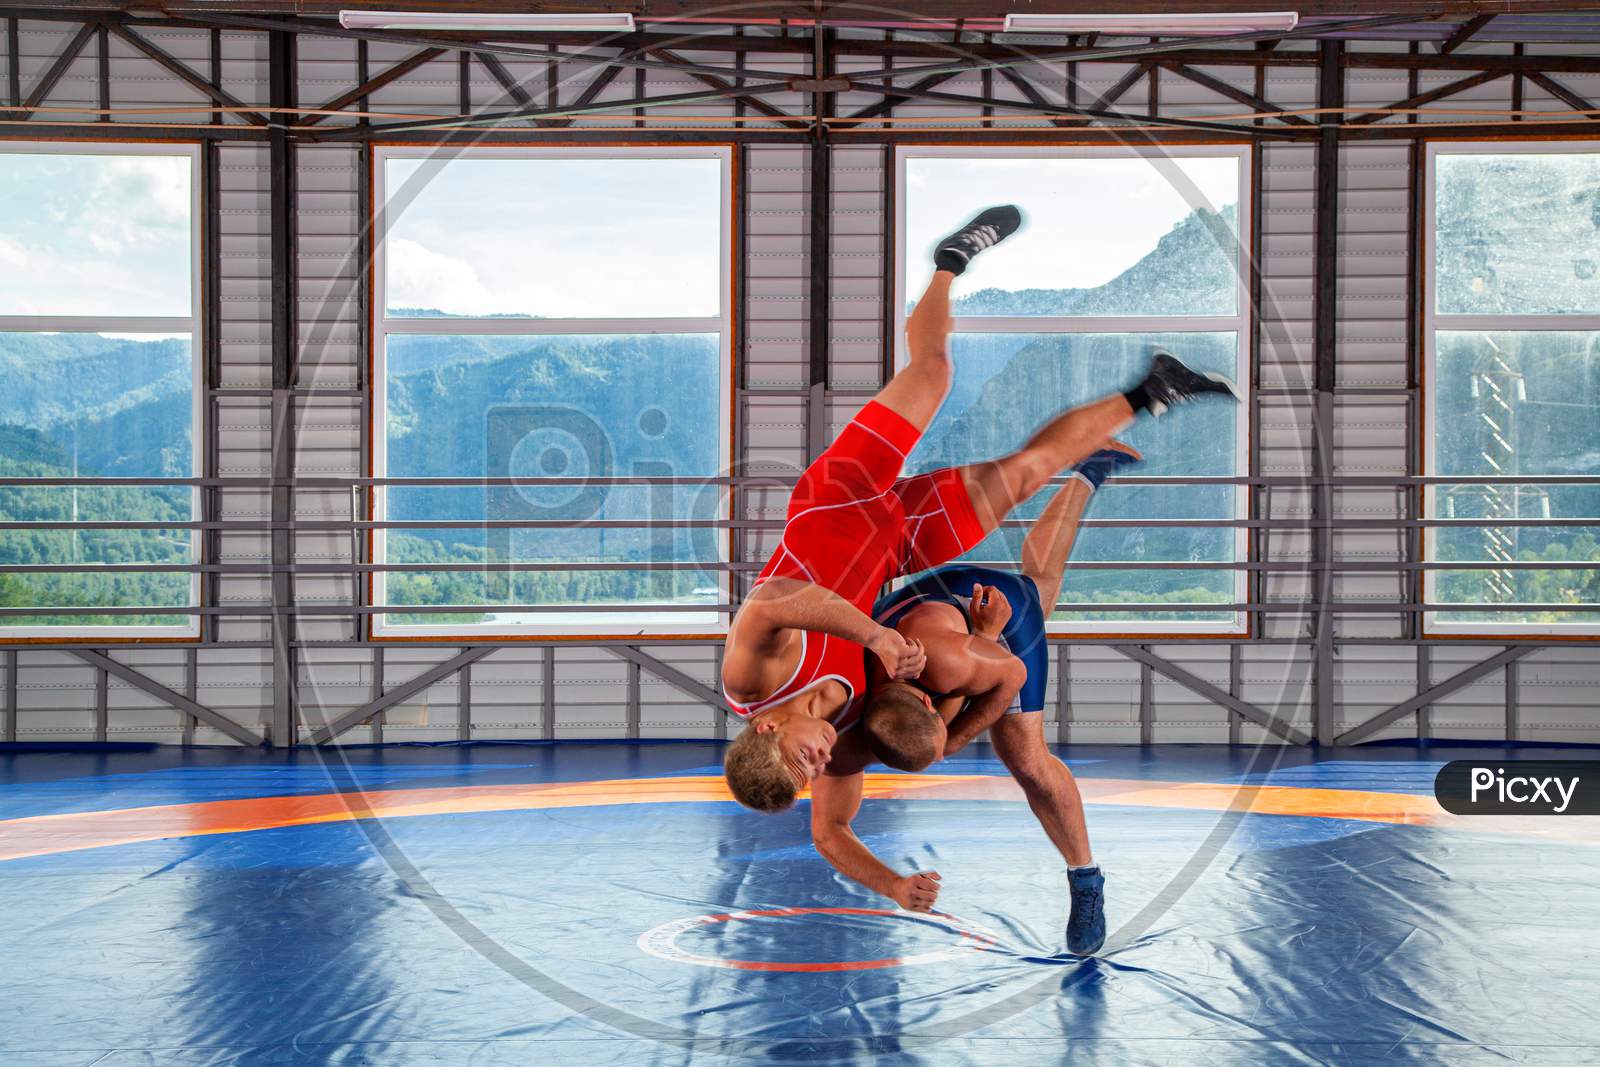 Two Young Men In Blue And Red Wrestling Tights Are Wrestlng And Making Shot Through The Thigh On A  Blue Wrestling Carpet In The Gym On The Background Of Mountains. The Concept Of Male Wrestling And Resistance